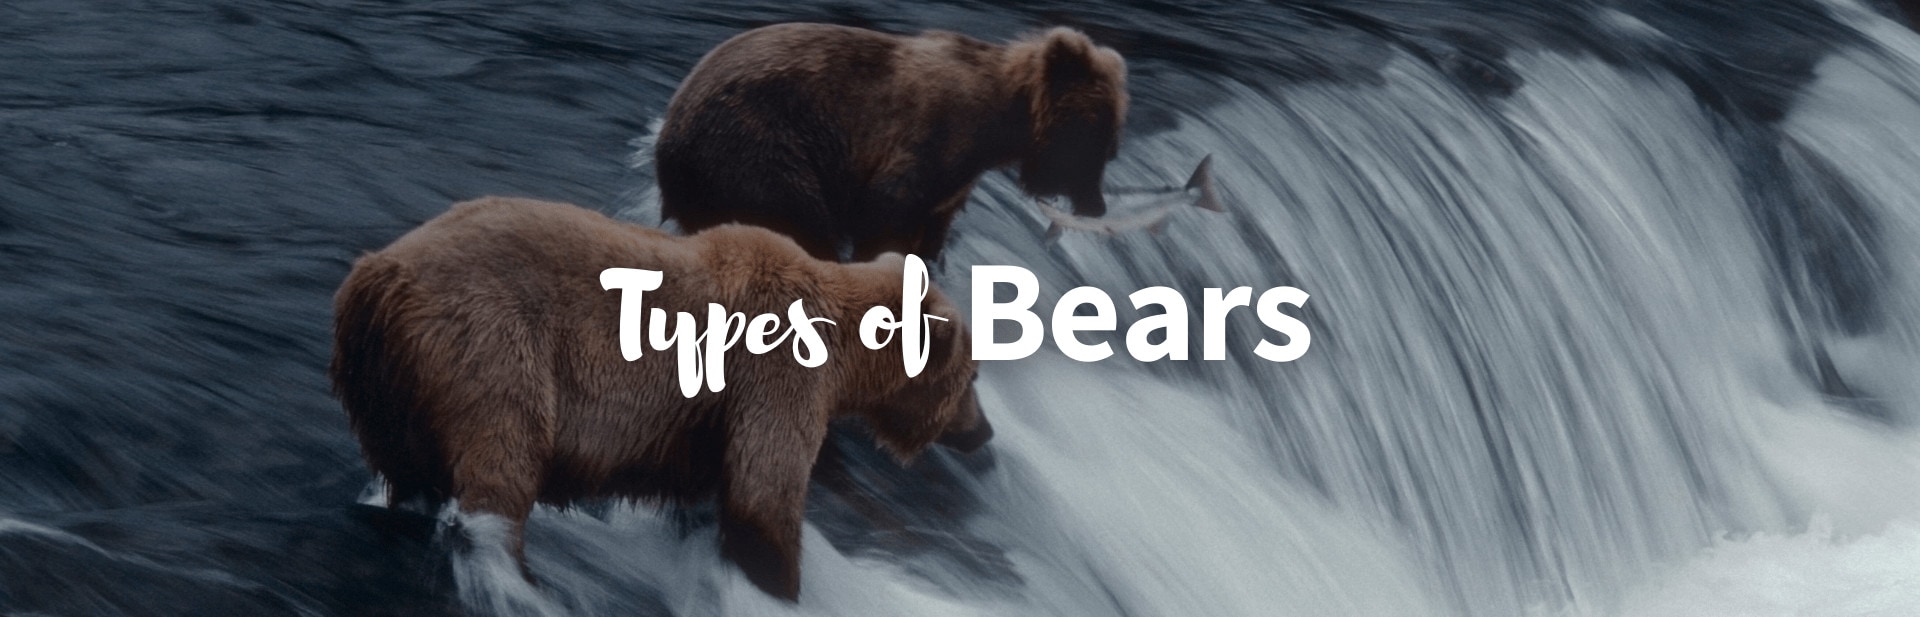 The 8 Different Types of Bears: Facts, Pictures and More